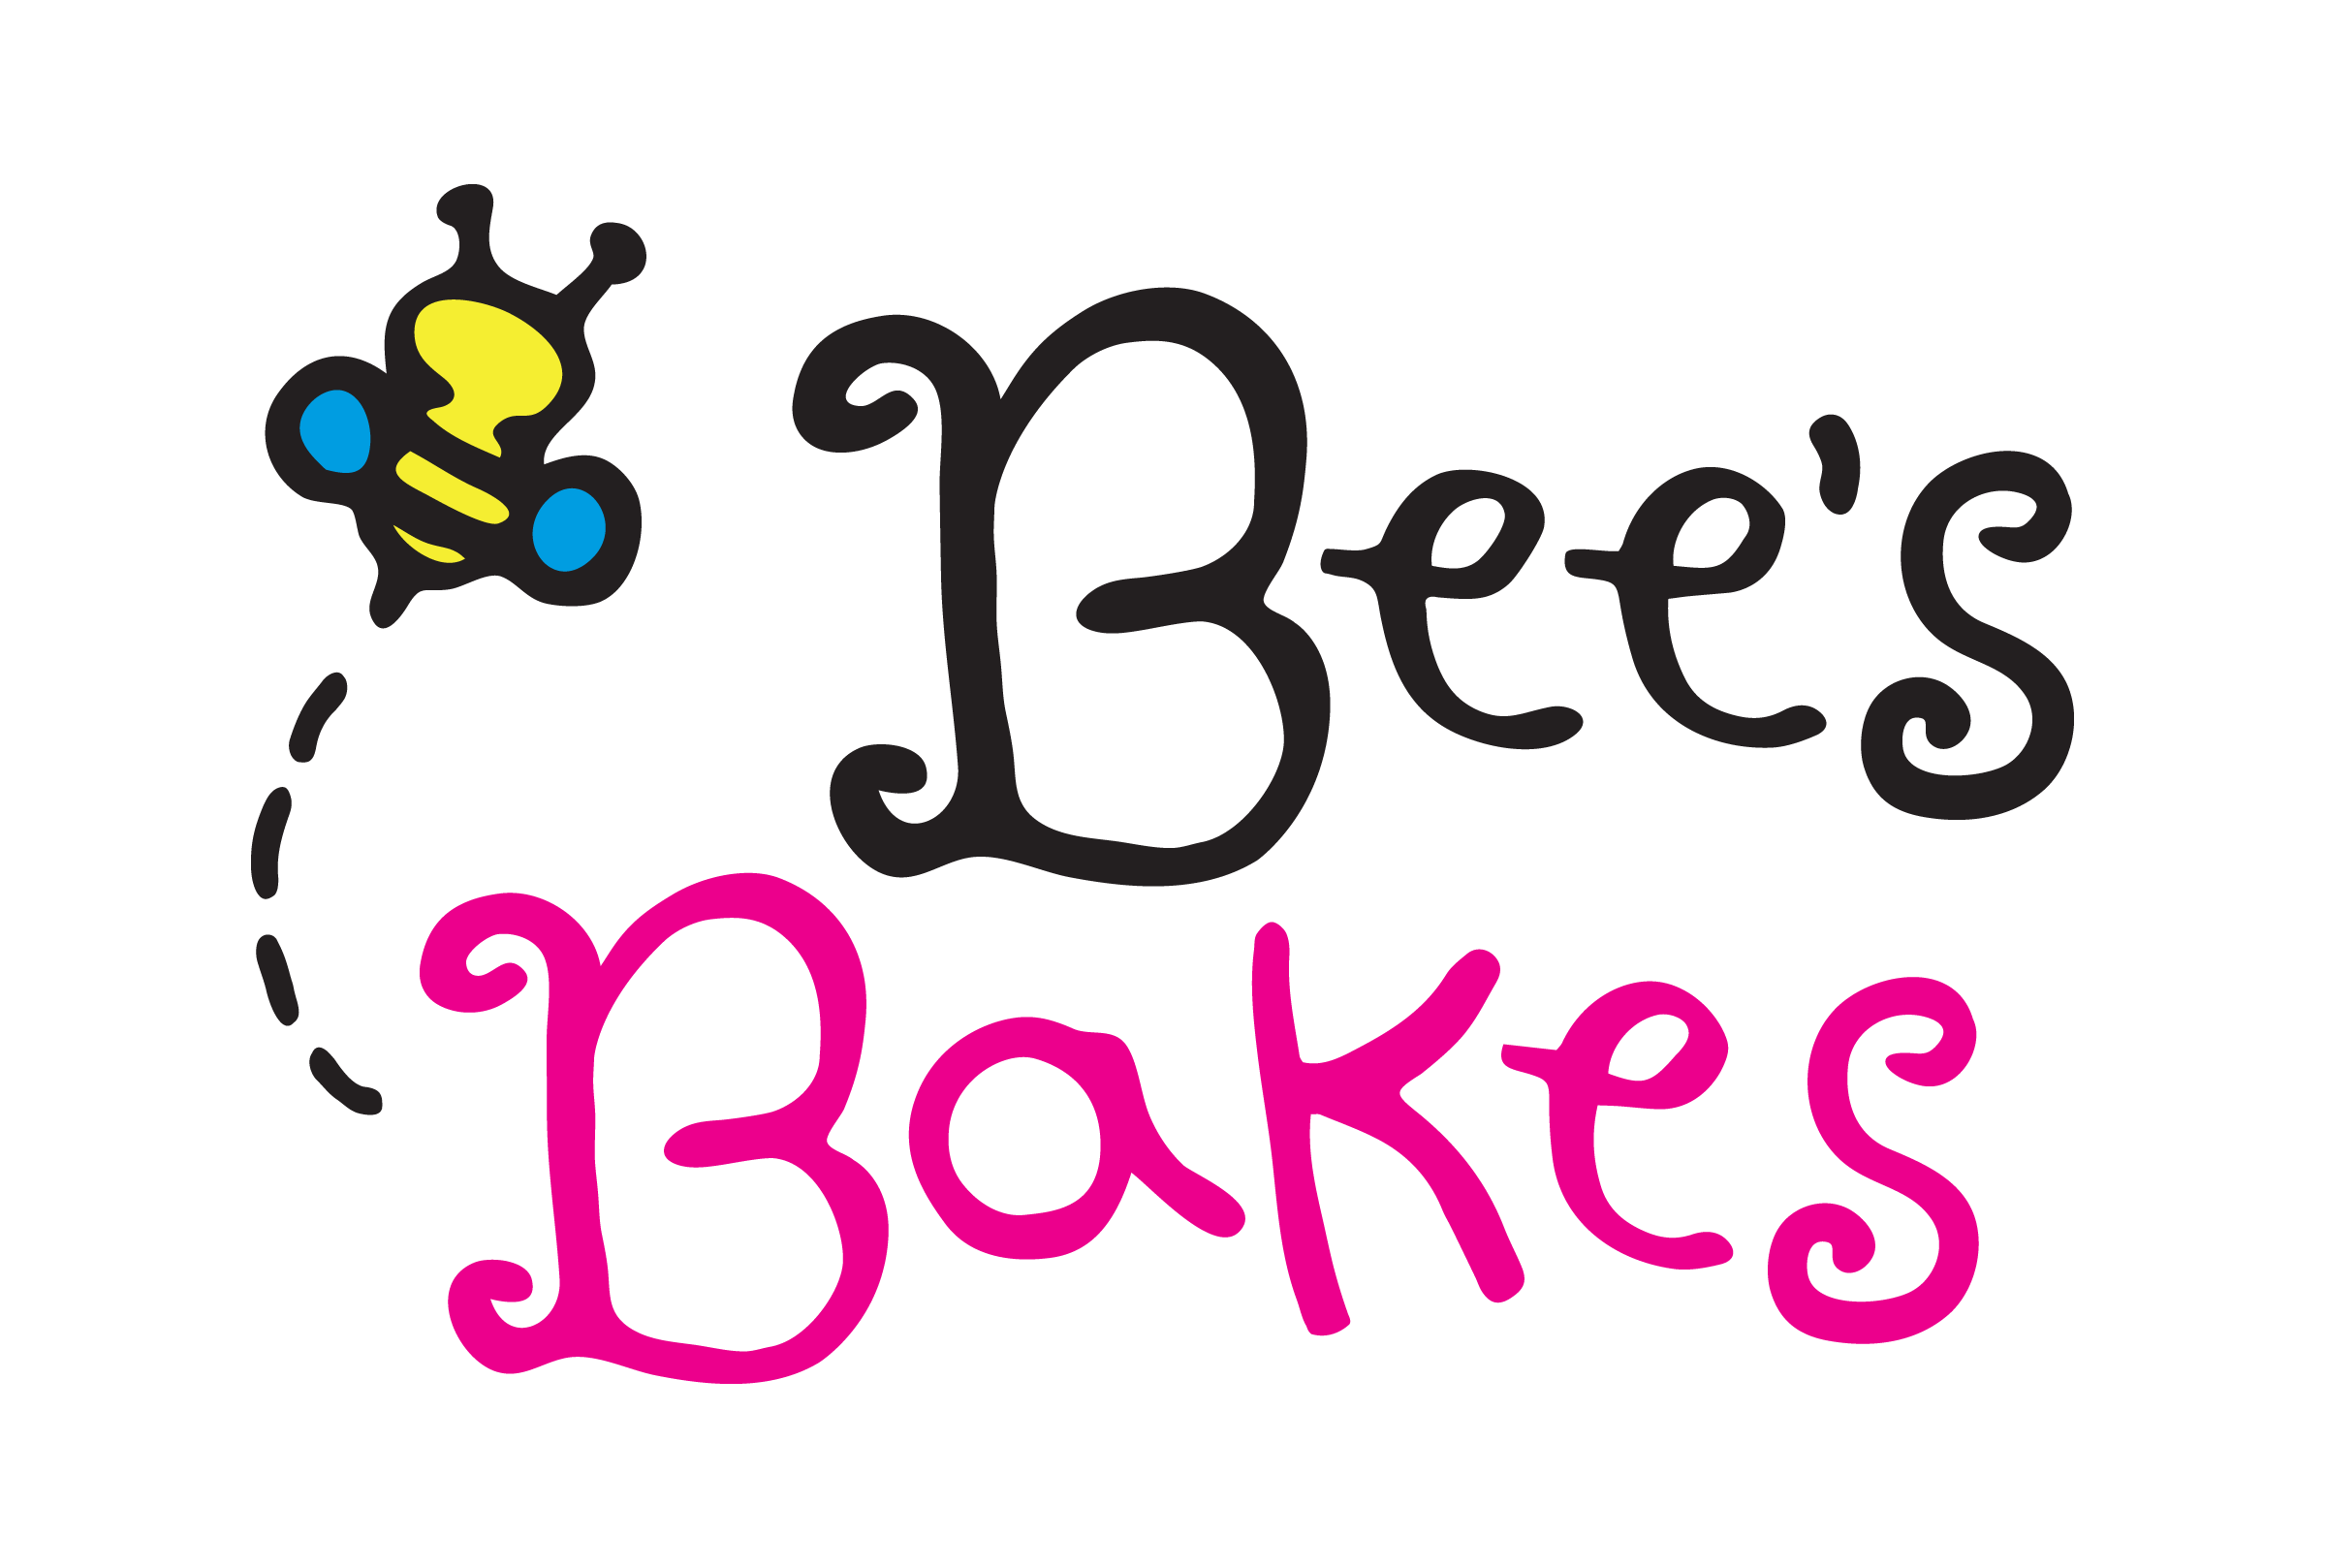 Bee's Bakes